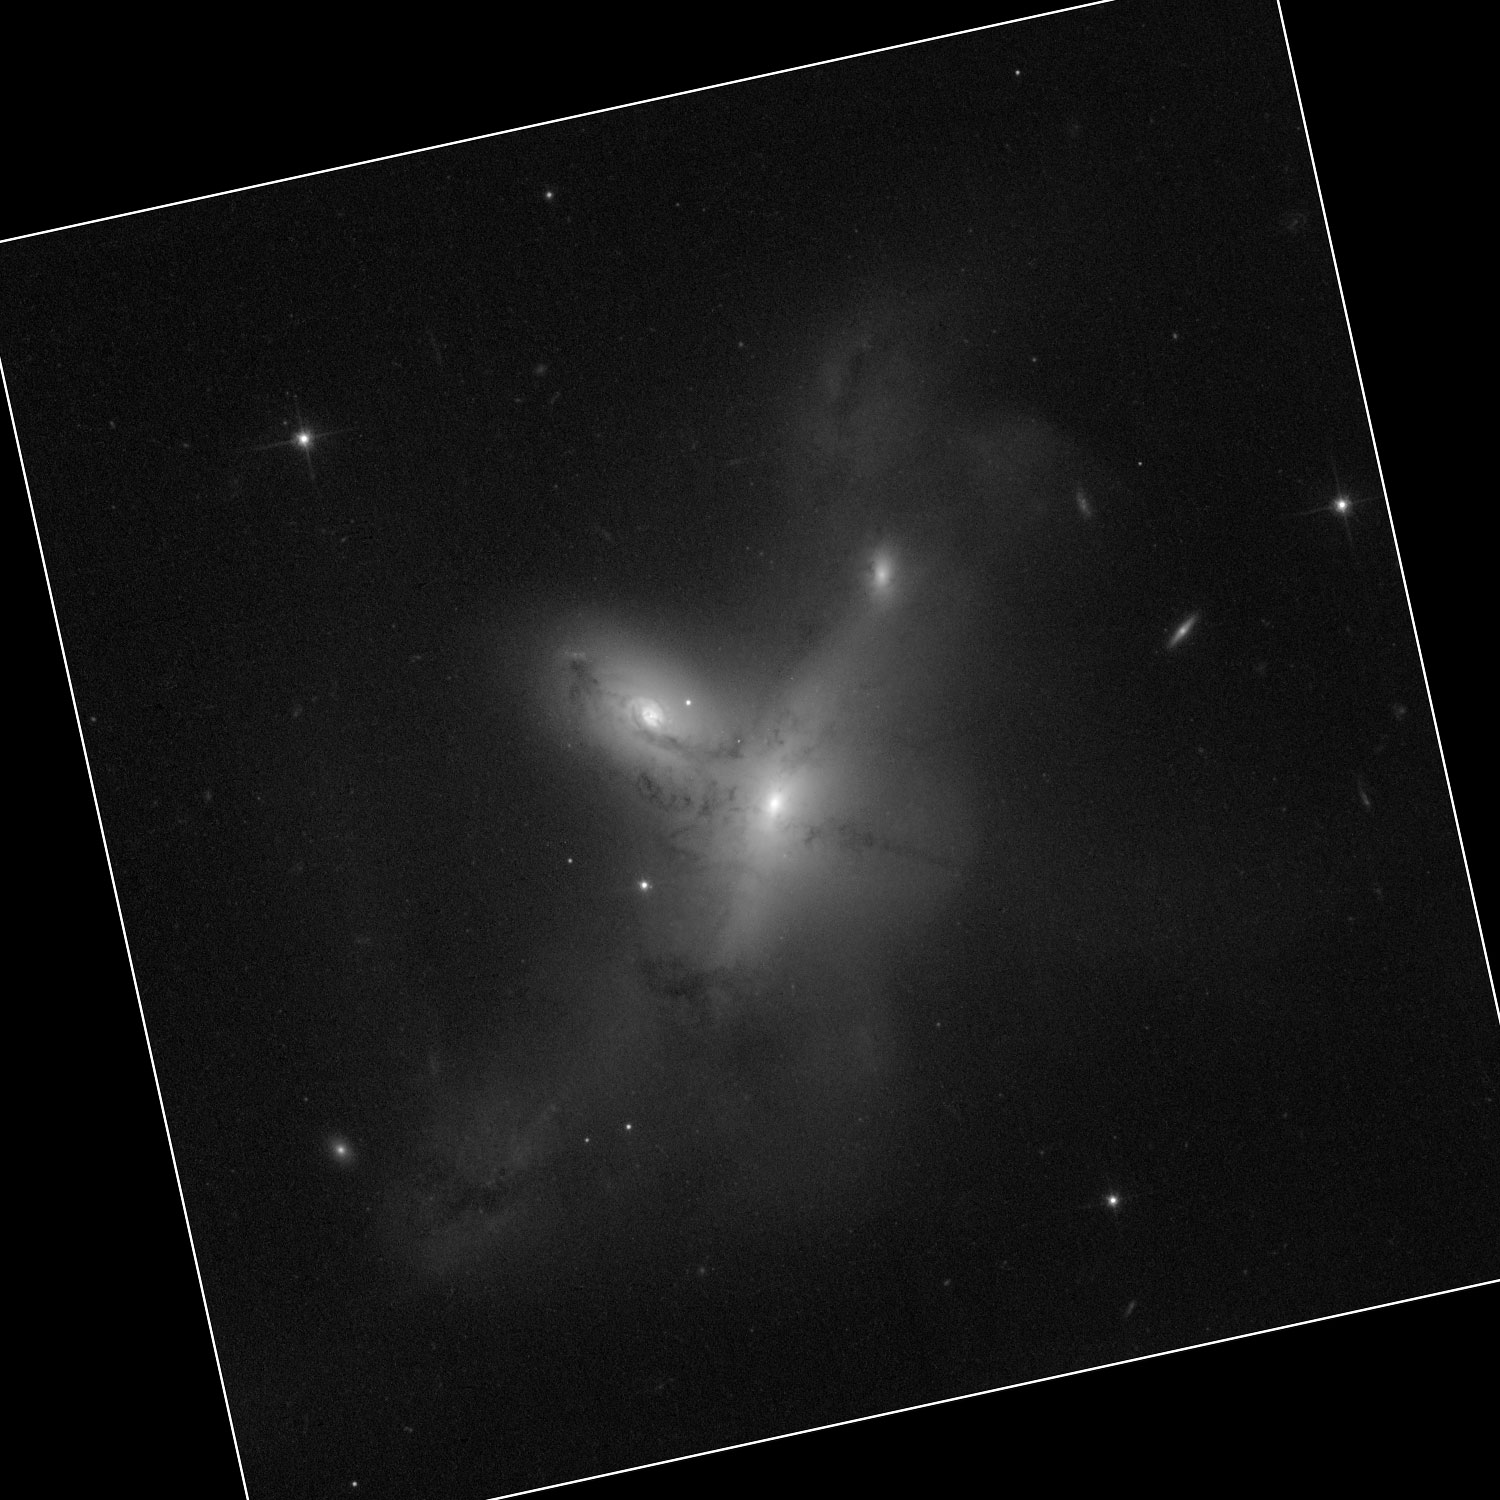 HST image of Arp-Madore 2115-273 (= PGC 66528 + PGC 66529) more or less as originally published